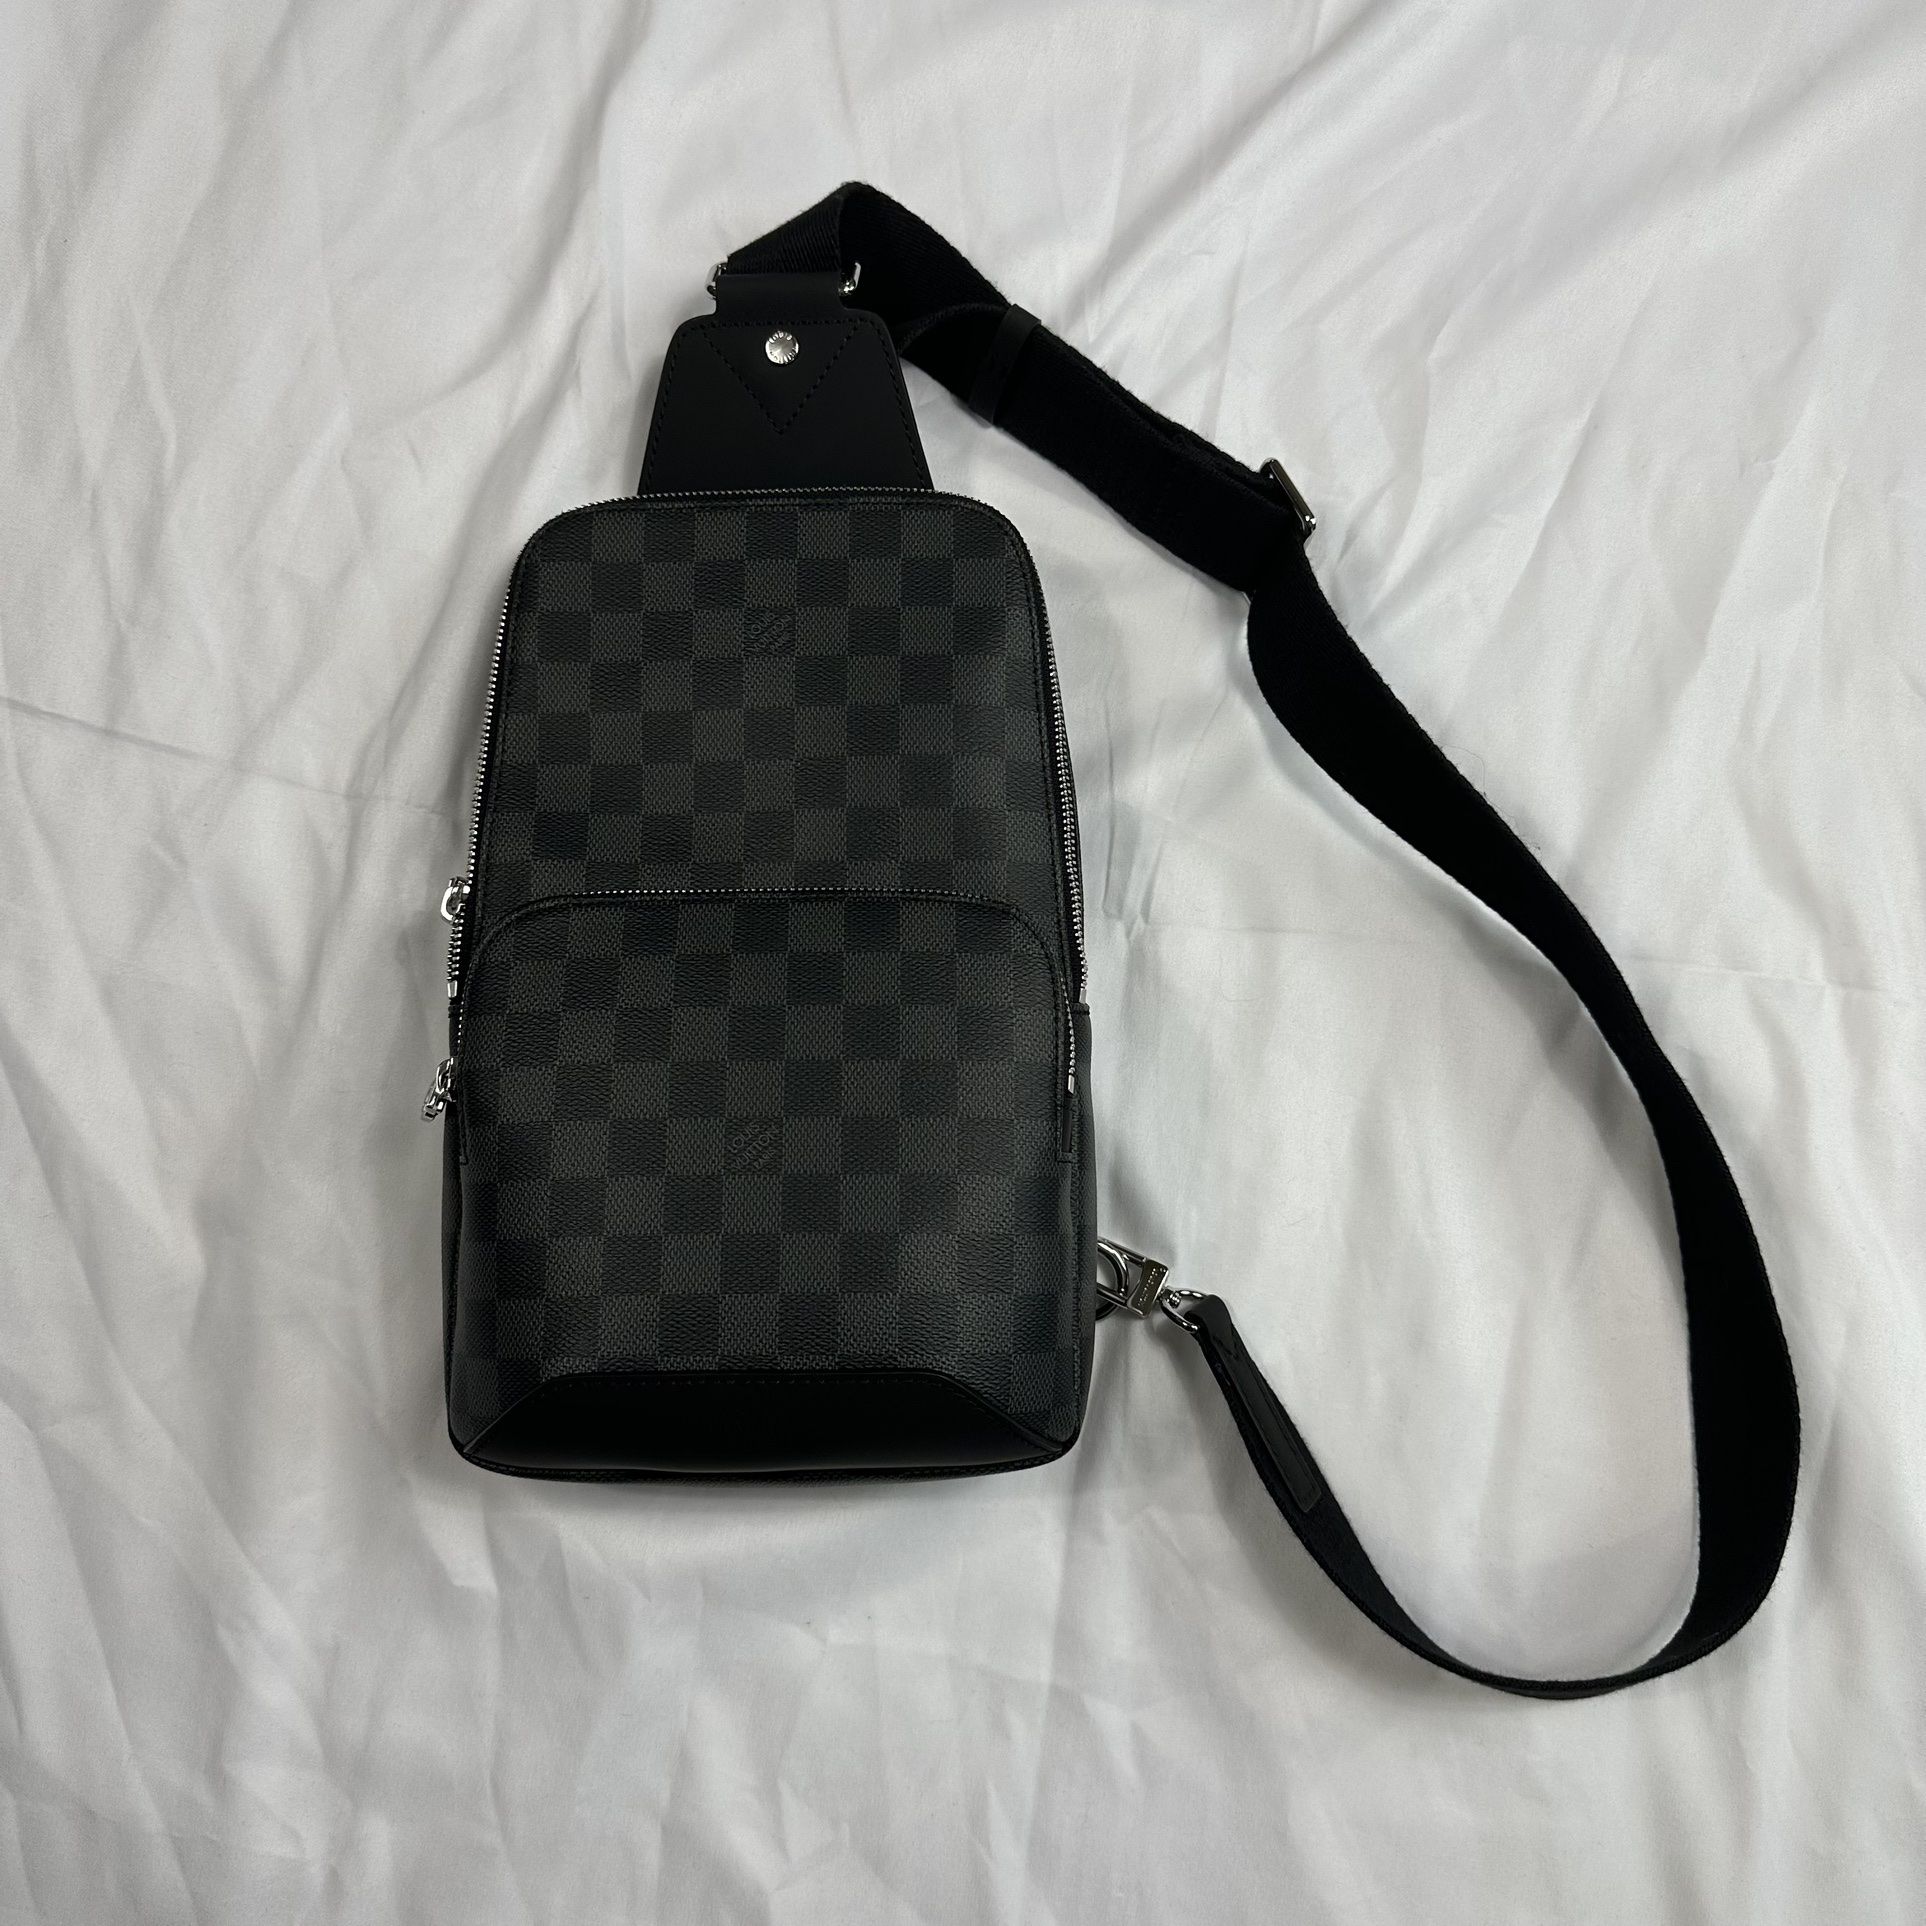 Louis Vuitton Sling Bag for Sale in Federal Way, WA - OfferUp